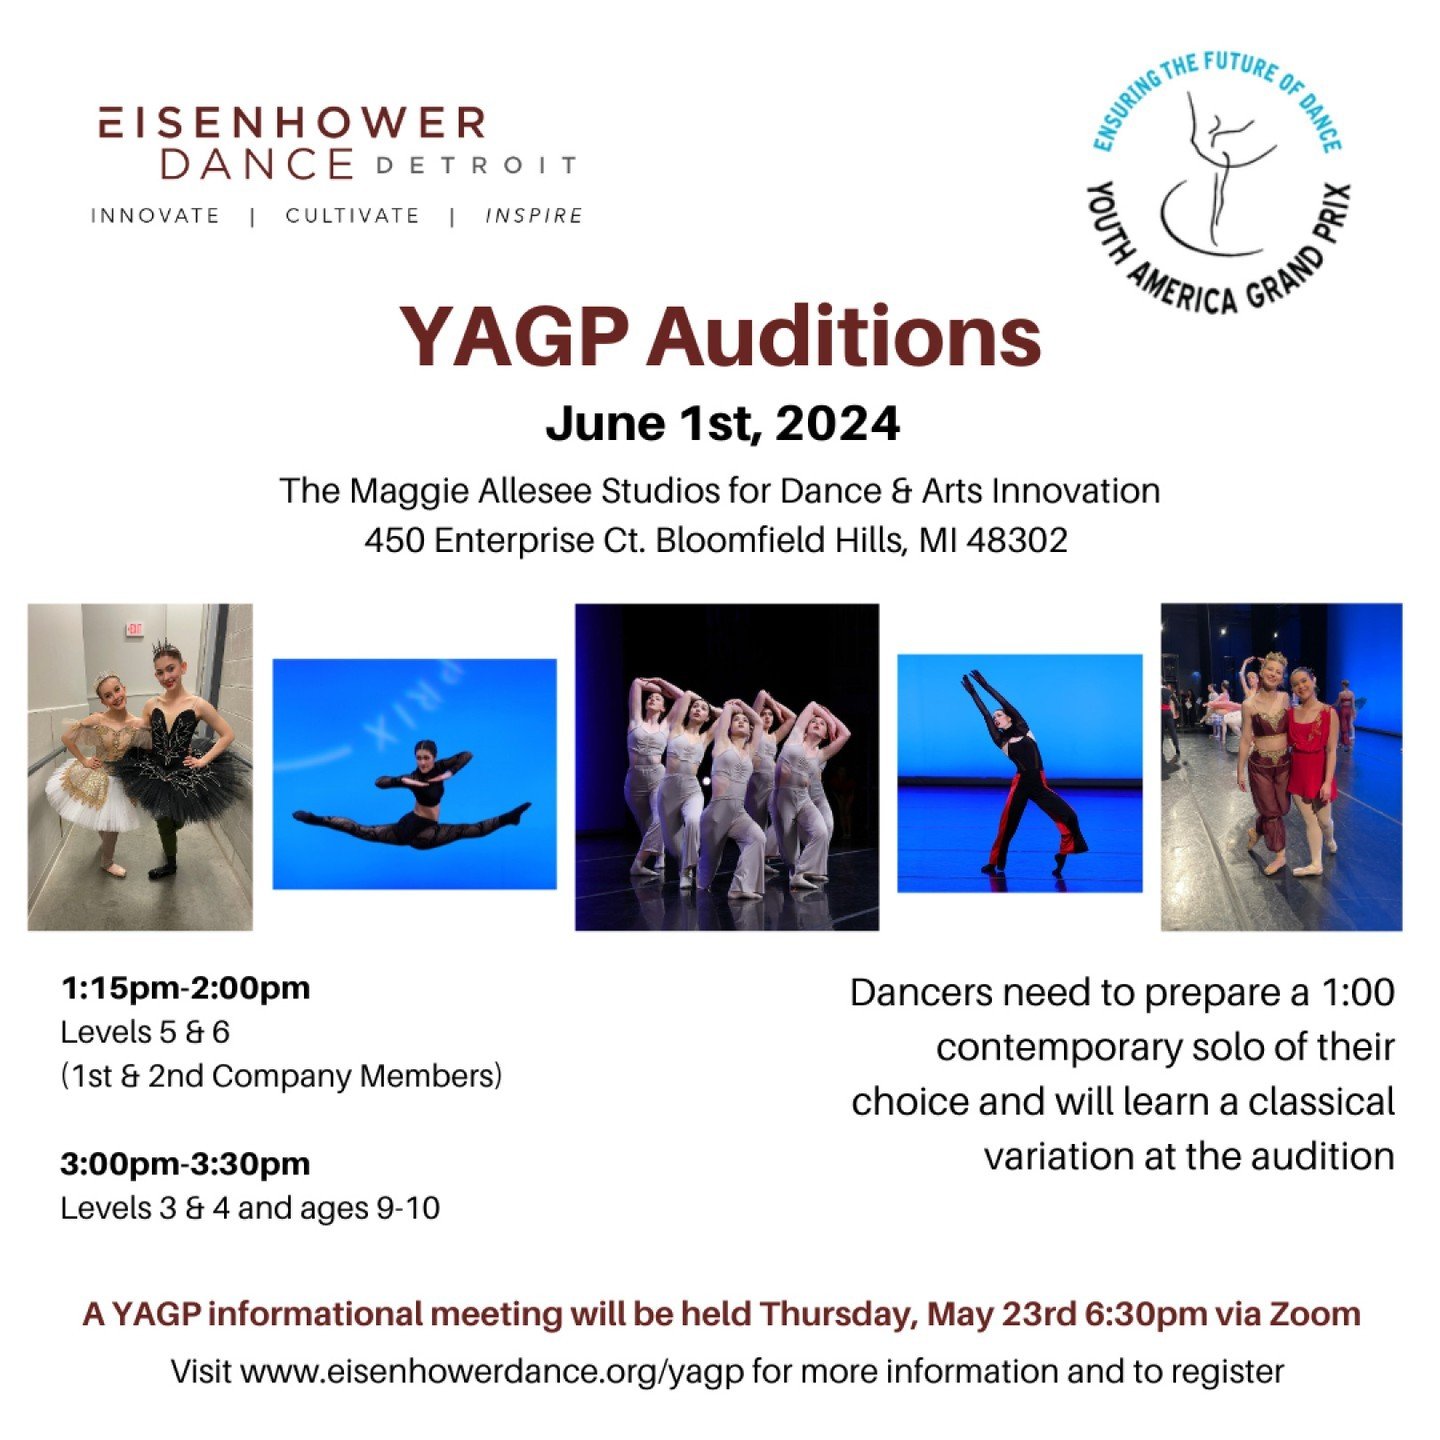 Don't forget to register to audition to compete at YAGP with the School of Eisenhower Dance Detroit - view the audition schedule and sign up at the link in our bio! ⠀⠀⠀⠀⠀⠀⠀⠀⠀
⠀⠀⠀⠀⠀⠀⠀⠀⠀
June 1, 2024 ⠀⠀⠀⠀⠀⠀⠀⠀
The Maggie Allesee Studios for Dance &amp; 